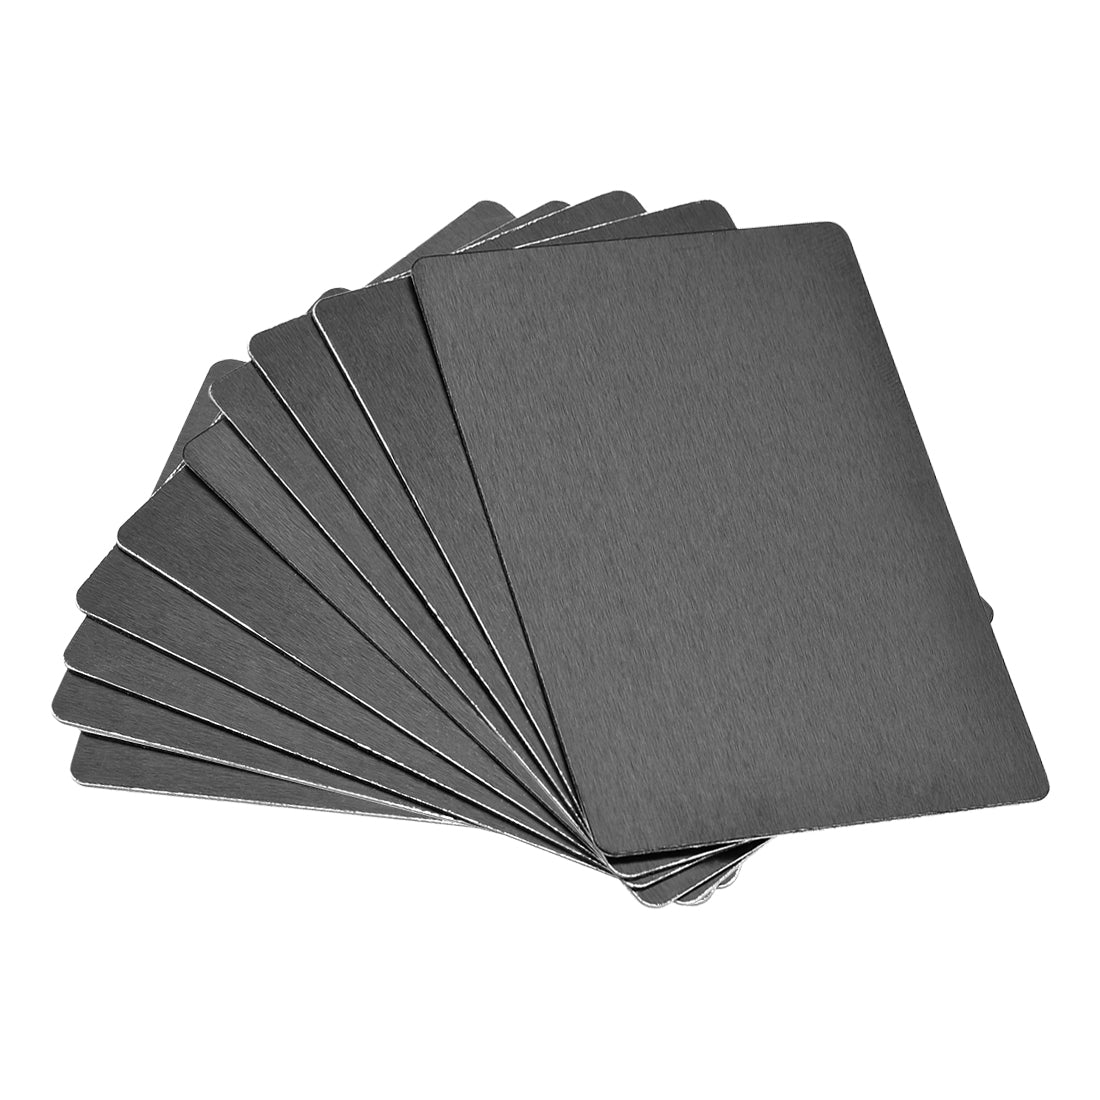 uxcell Uxcell Blank Metal Cards, Anodized Aluminum Plate for DIY Laser Printing